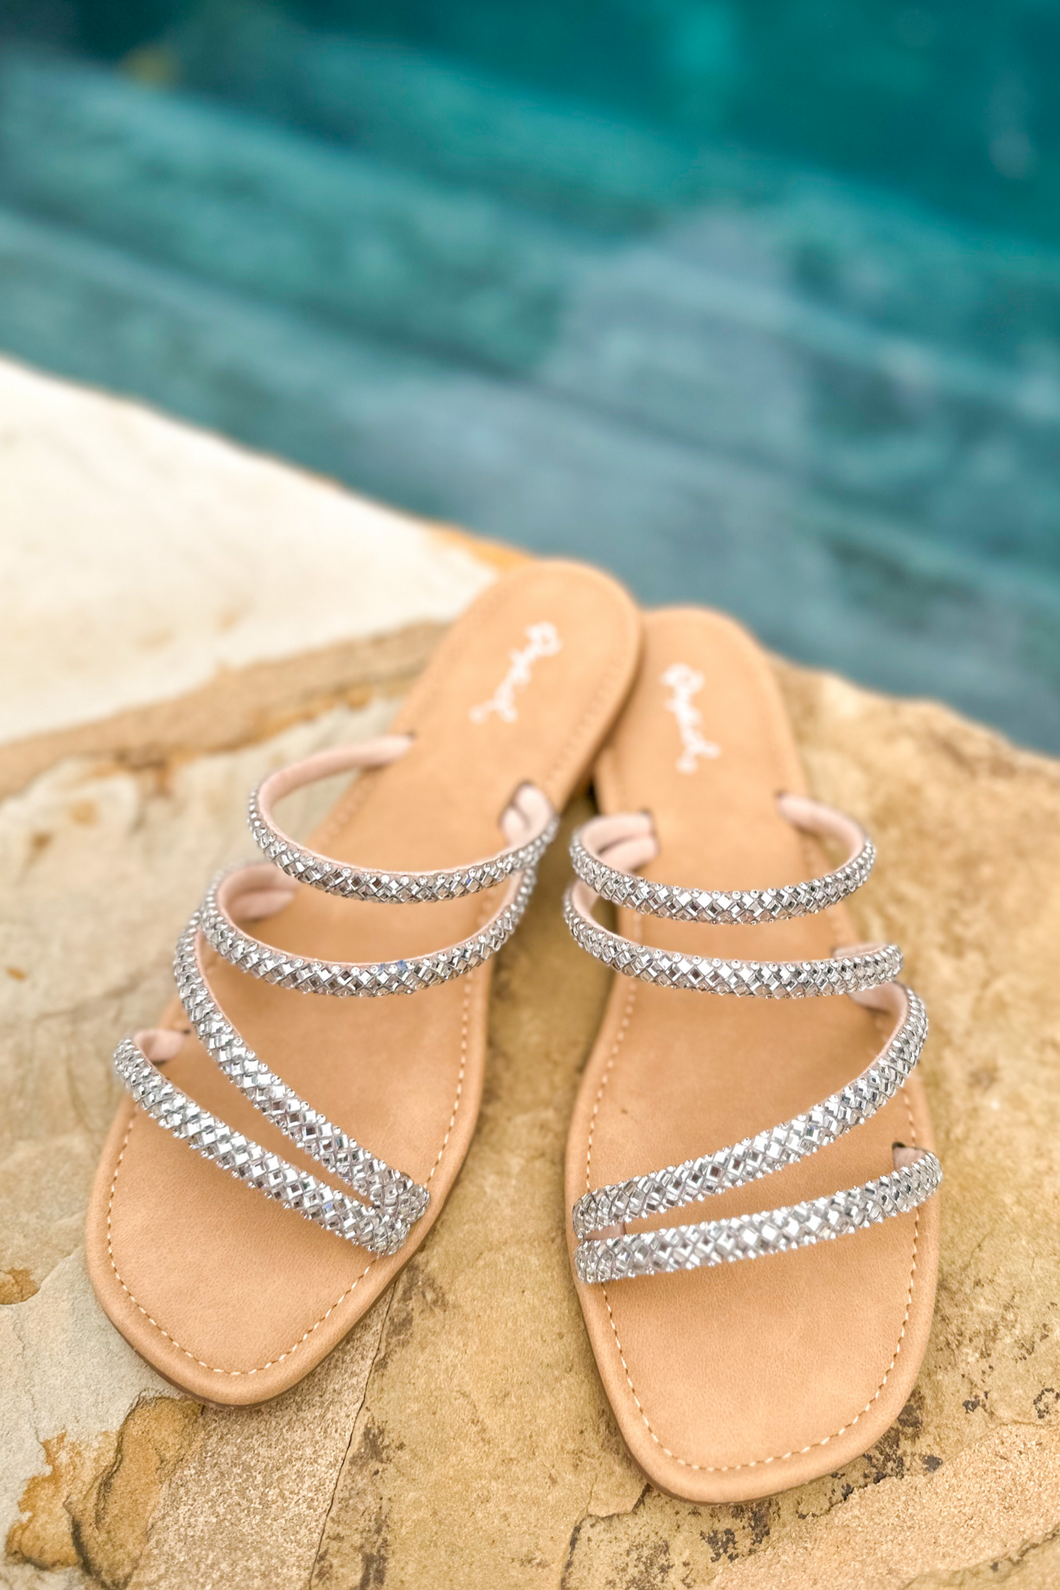 What Dreams Are Made Of Rhinestone Sandal